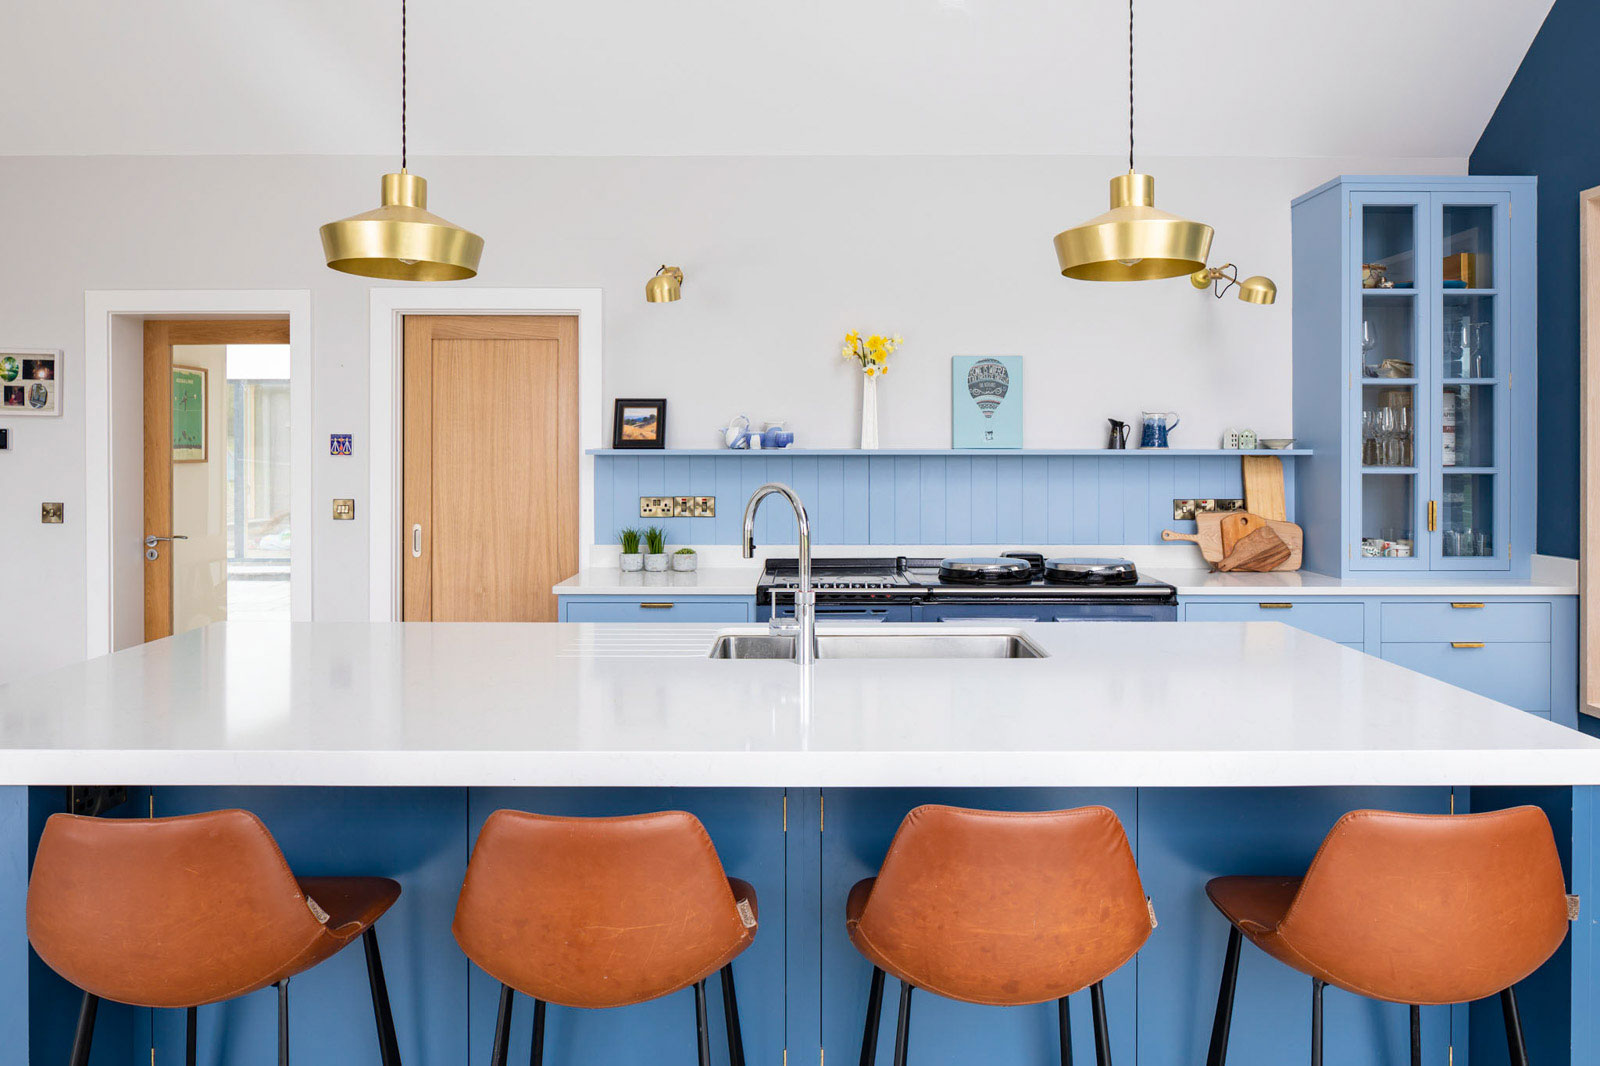 Soft Brass Lighting Finishes in this Modern Farmhouse Kitchen